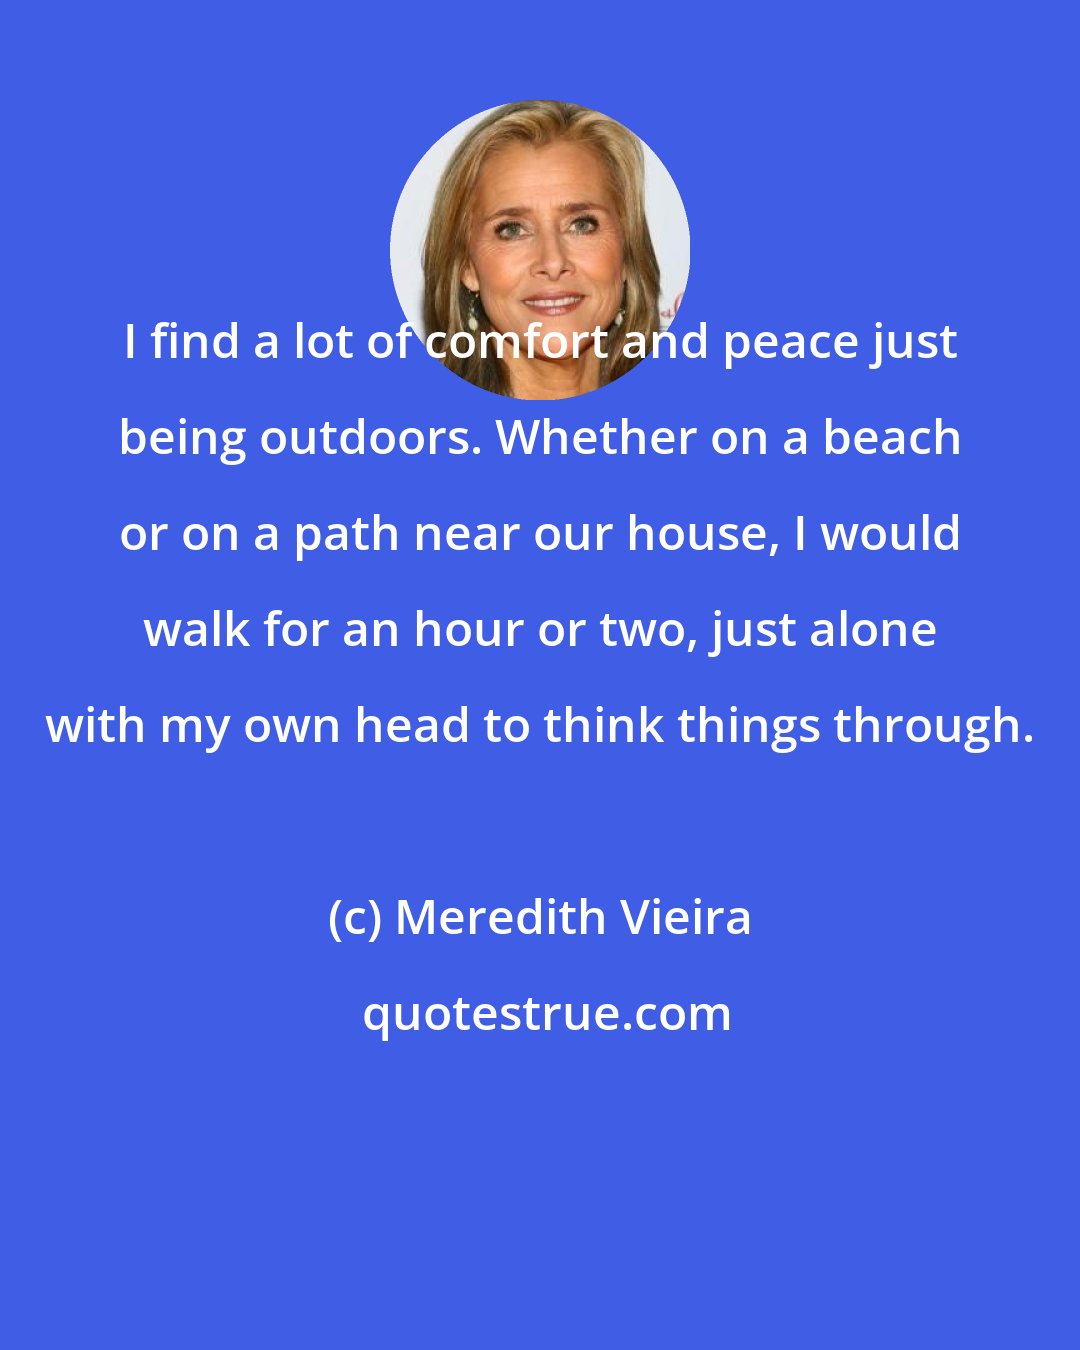 Meredith Vieira: I find a lot of comfort and peace just being outdoors. Whether on a beach or on a path near our house, I would walk for an hour or two, just alone with my own head to think things through.